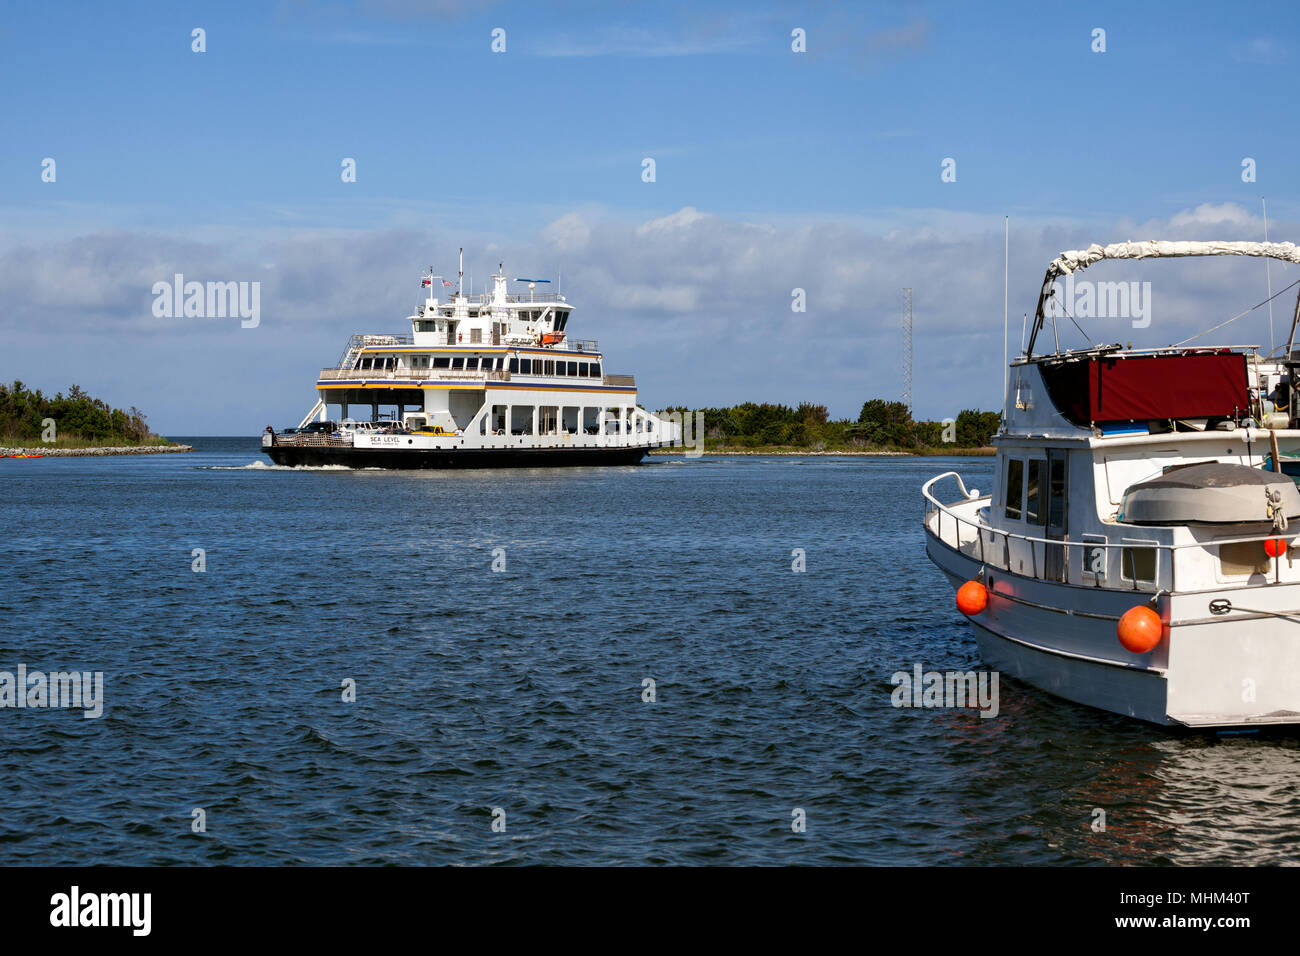 NC01579-00...NORTH CAROLINA - Ferry boat Sea Level entering Silver Lake Harbor in the town of Ocracoke on Ocracoke Island part of the Outer Banks. Stock Photo